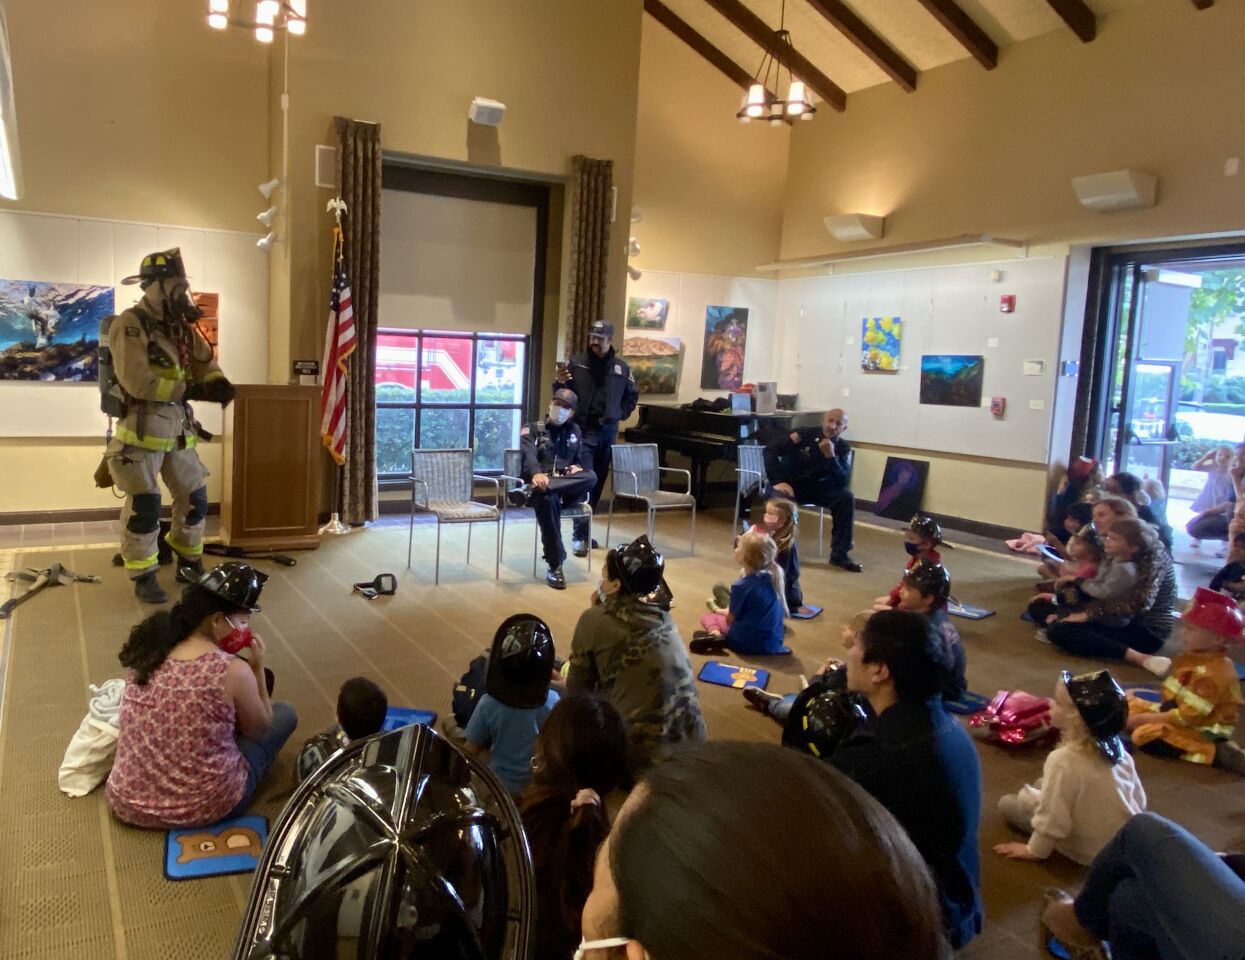 A La Jolla firefighter shows his protective gear to a crowd at the La Jolla/Riford Library on Nov. 4.